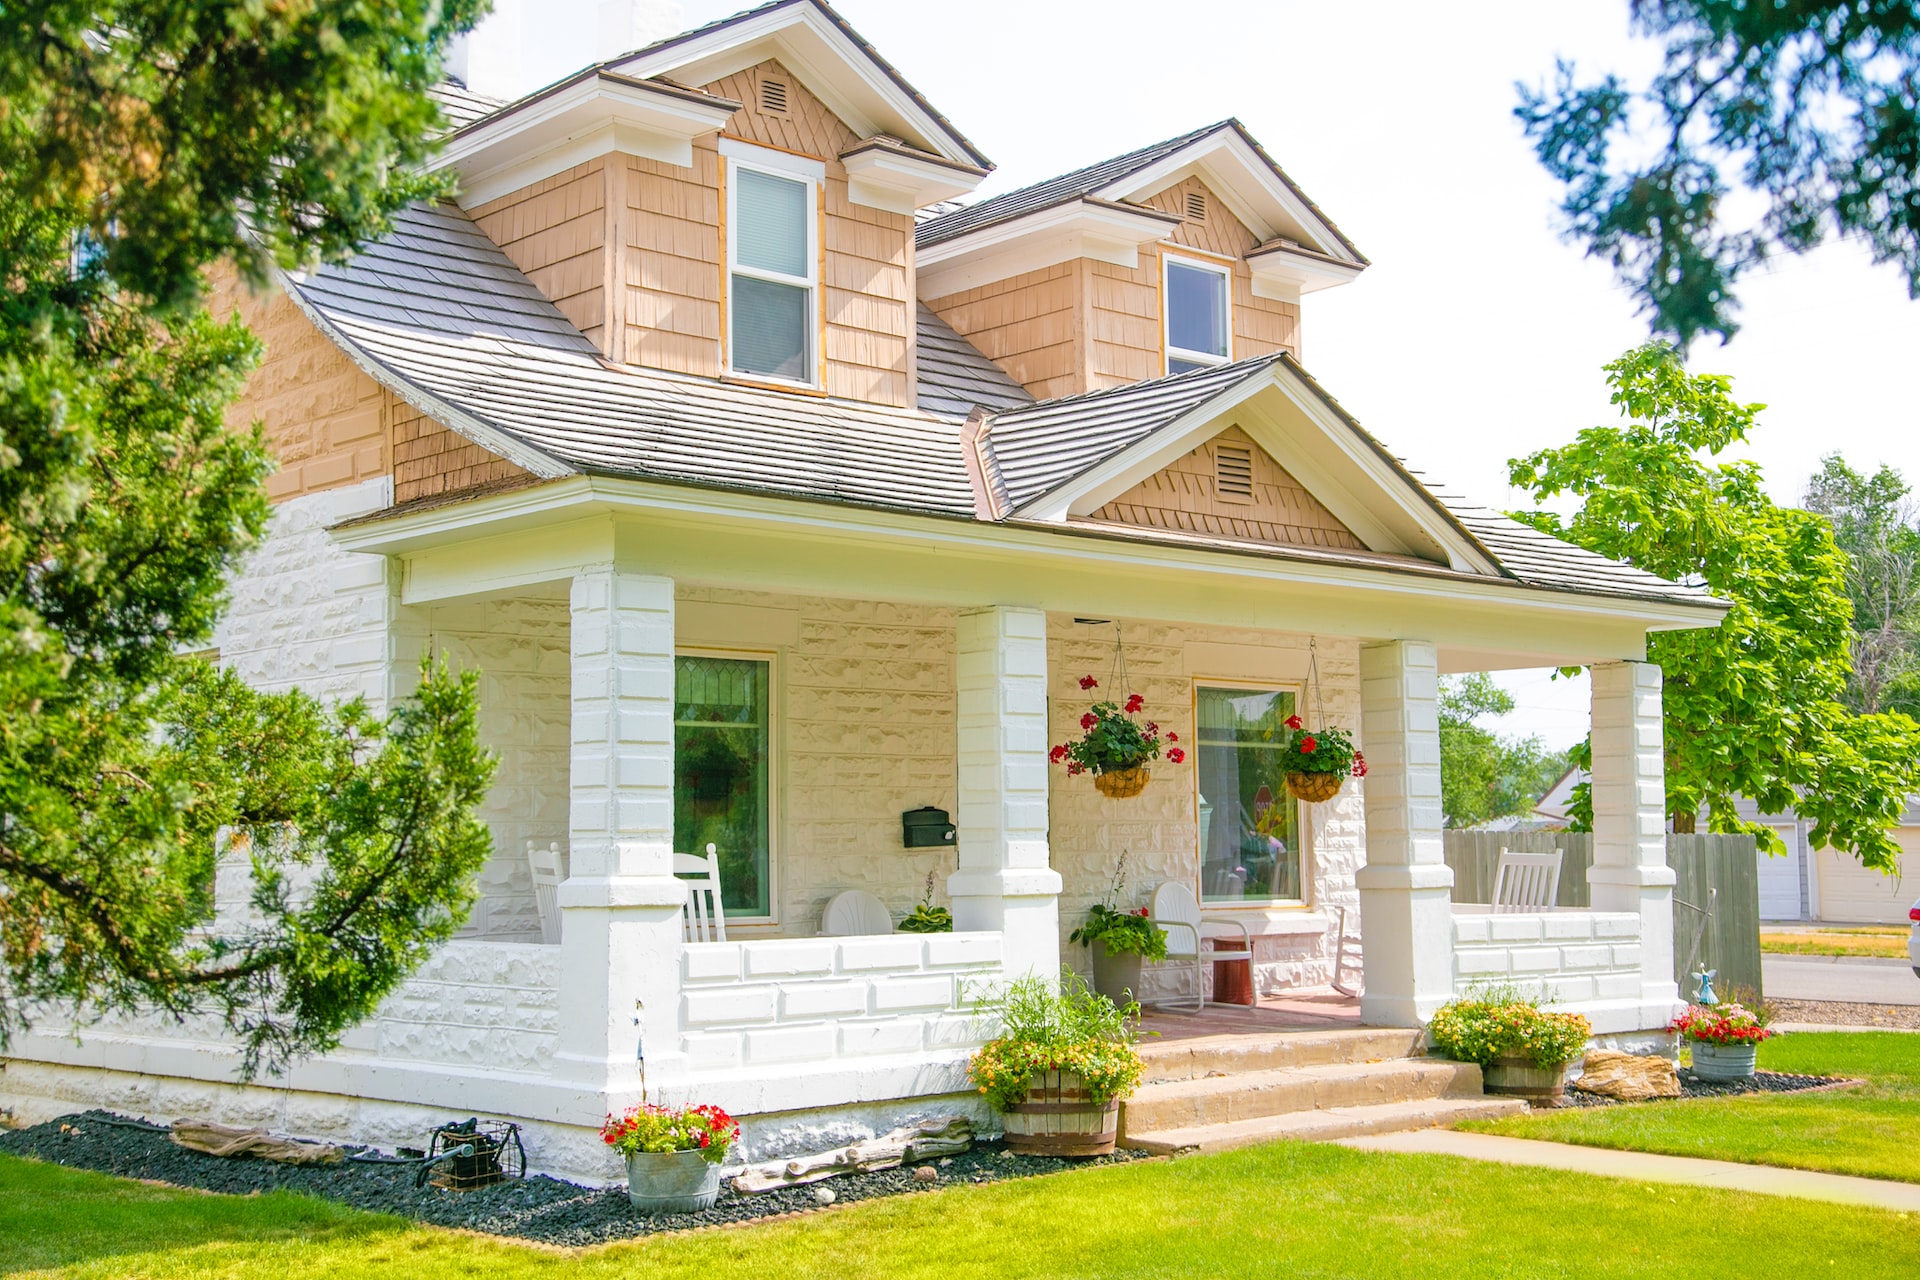 The Top 10 Ways on How to Prepare for a Home Inspection